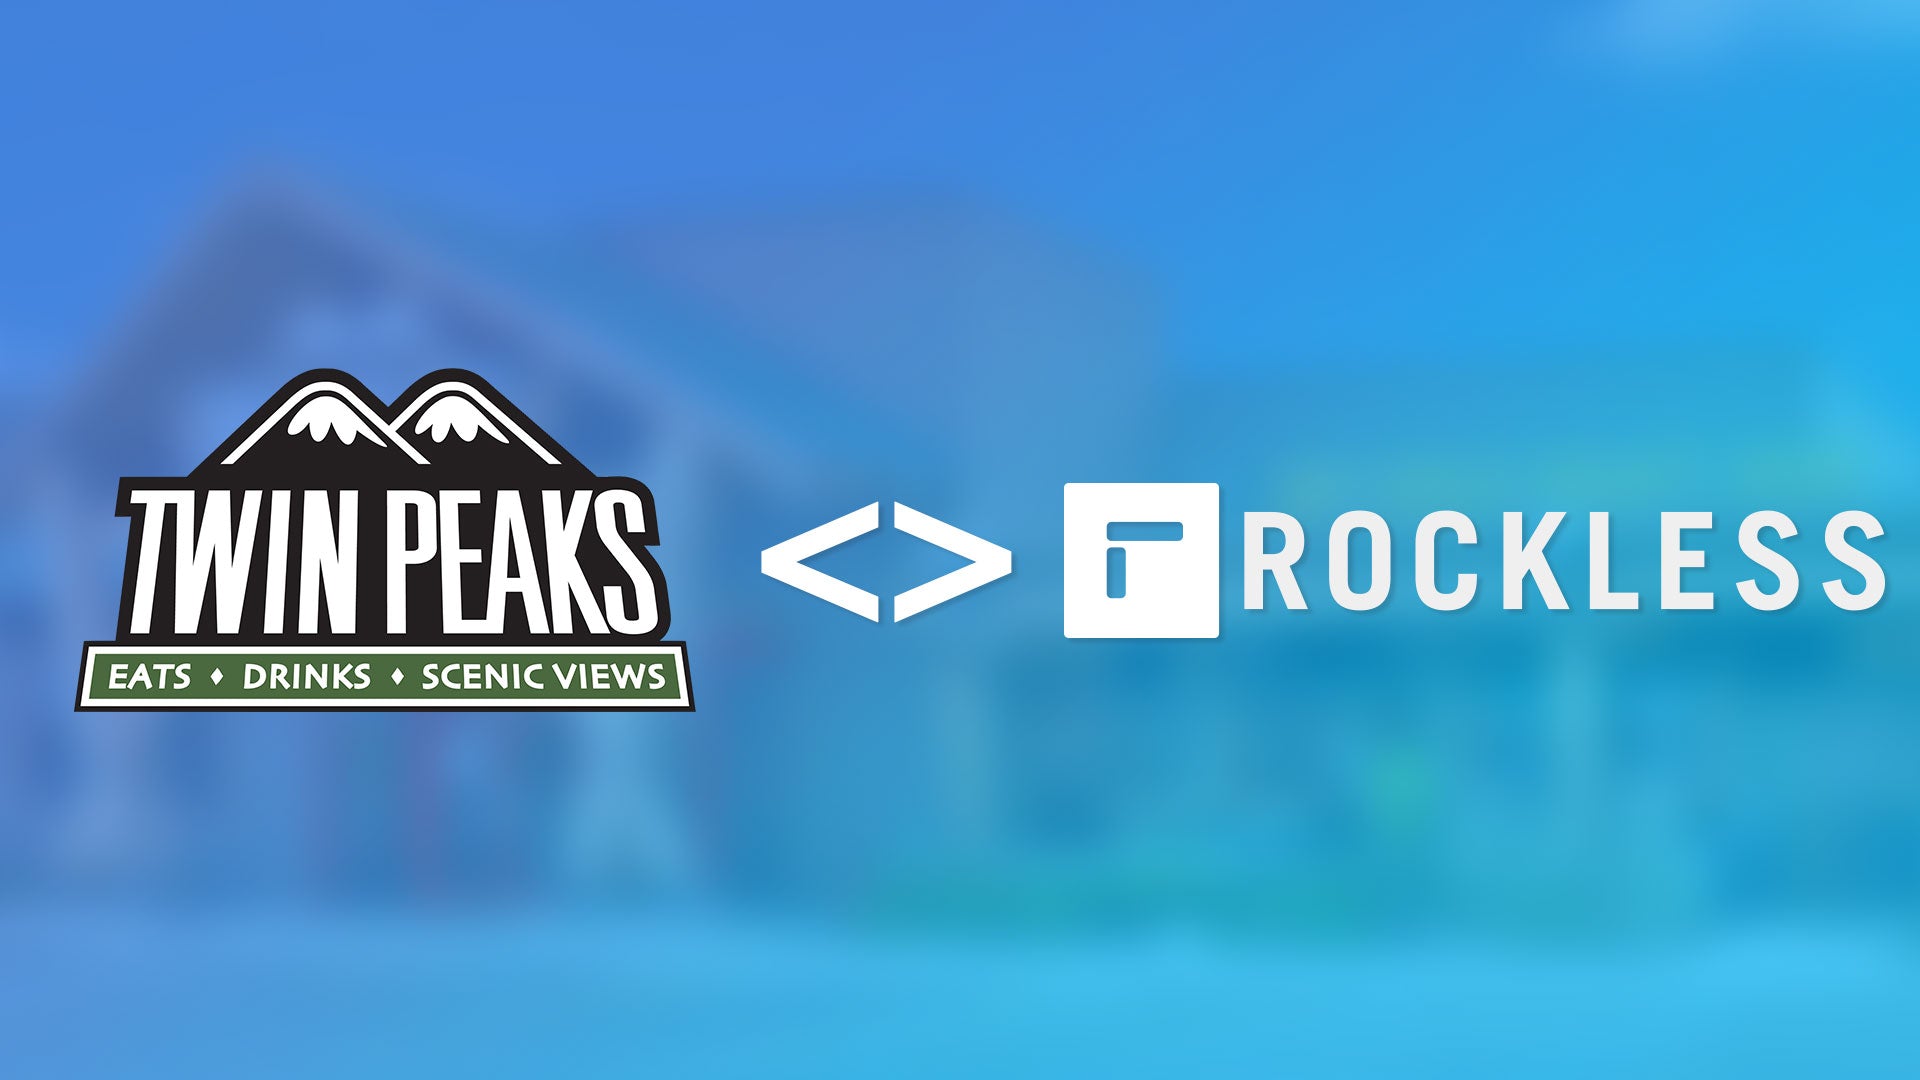 Rockless Table joins forces with Twin Peaks